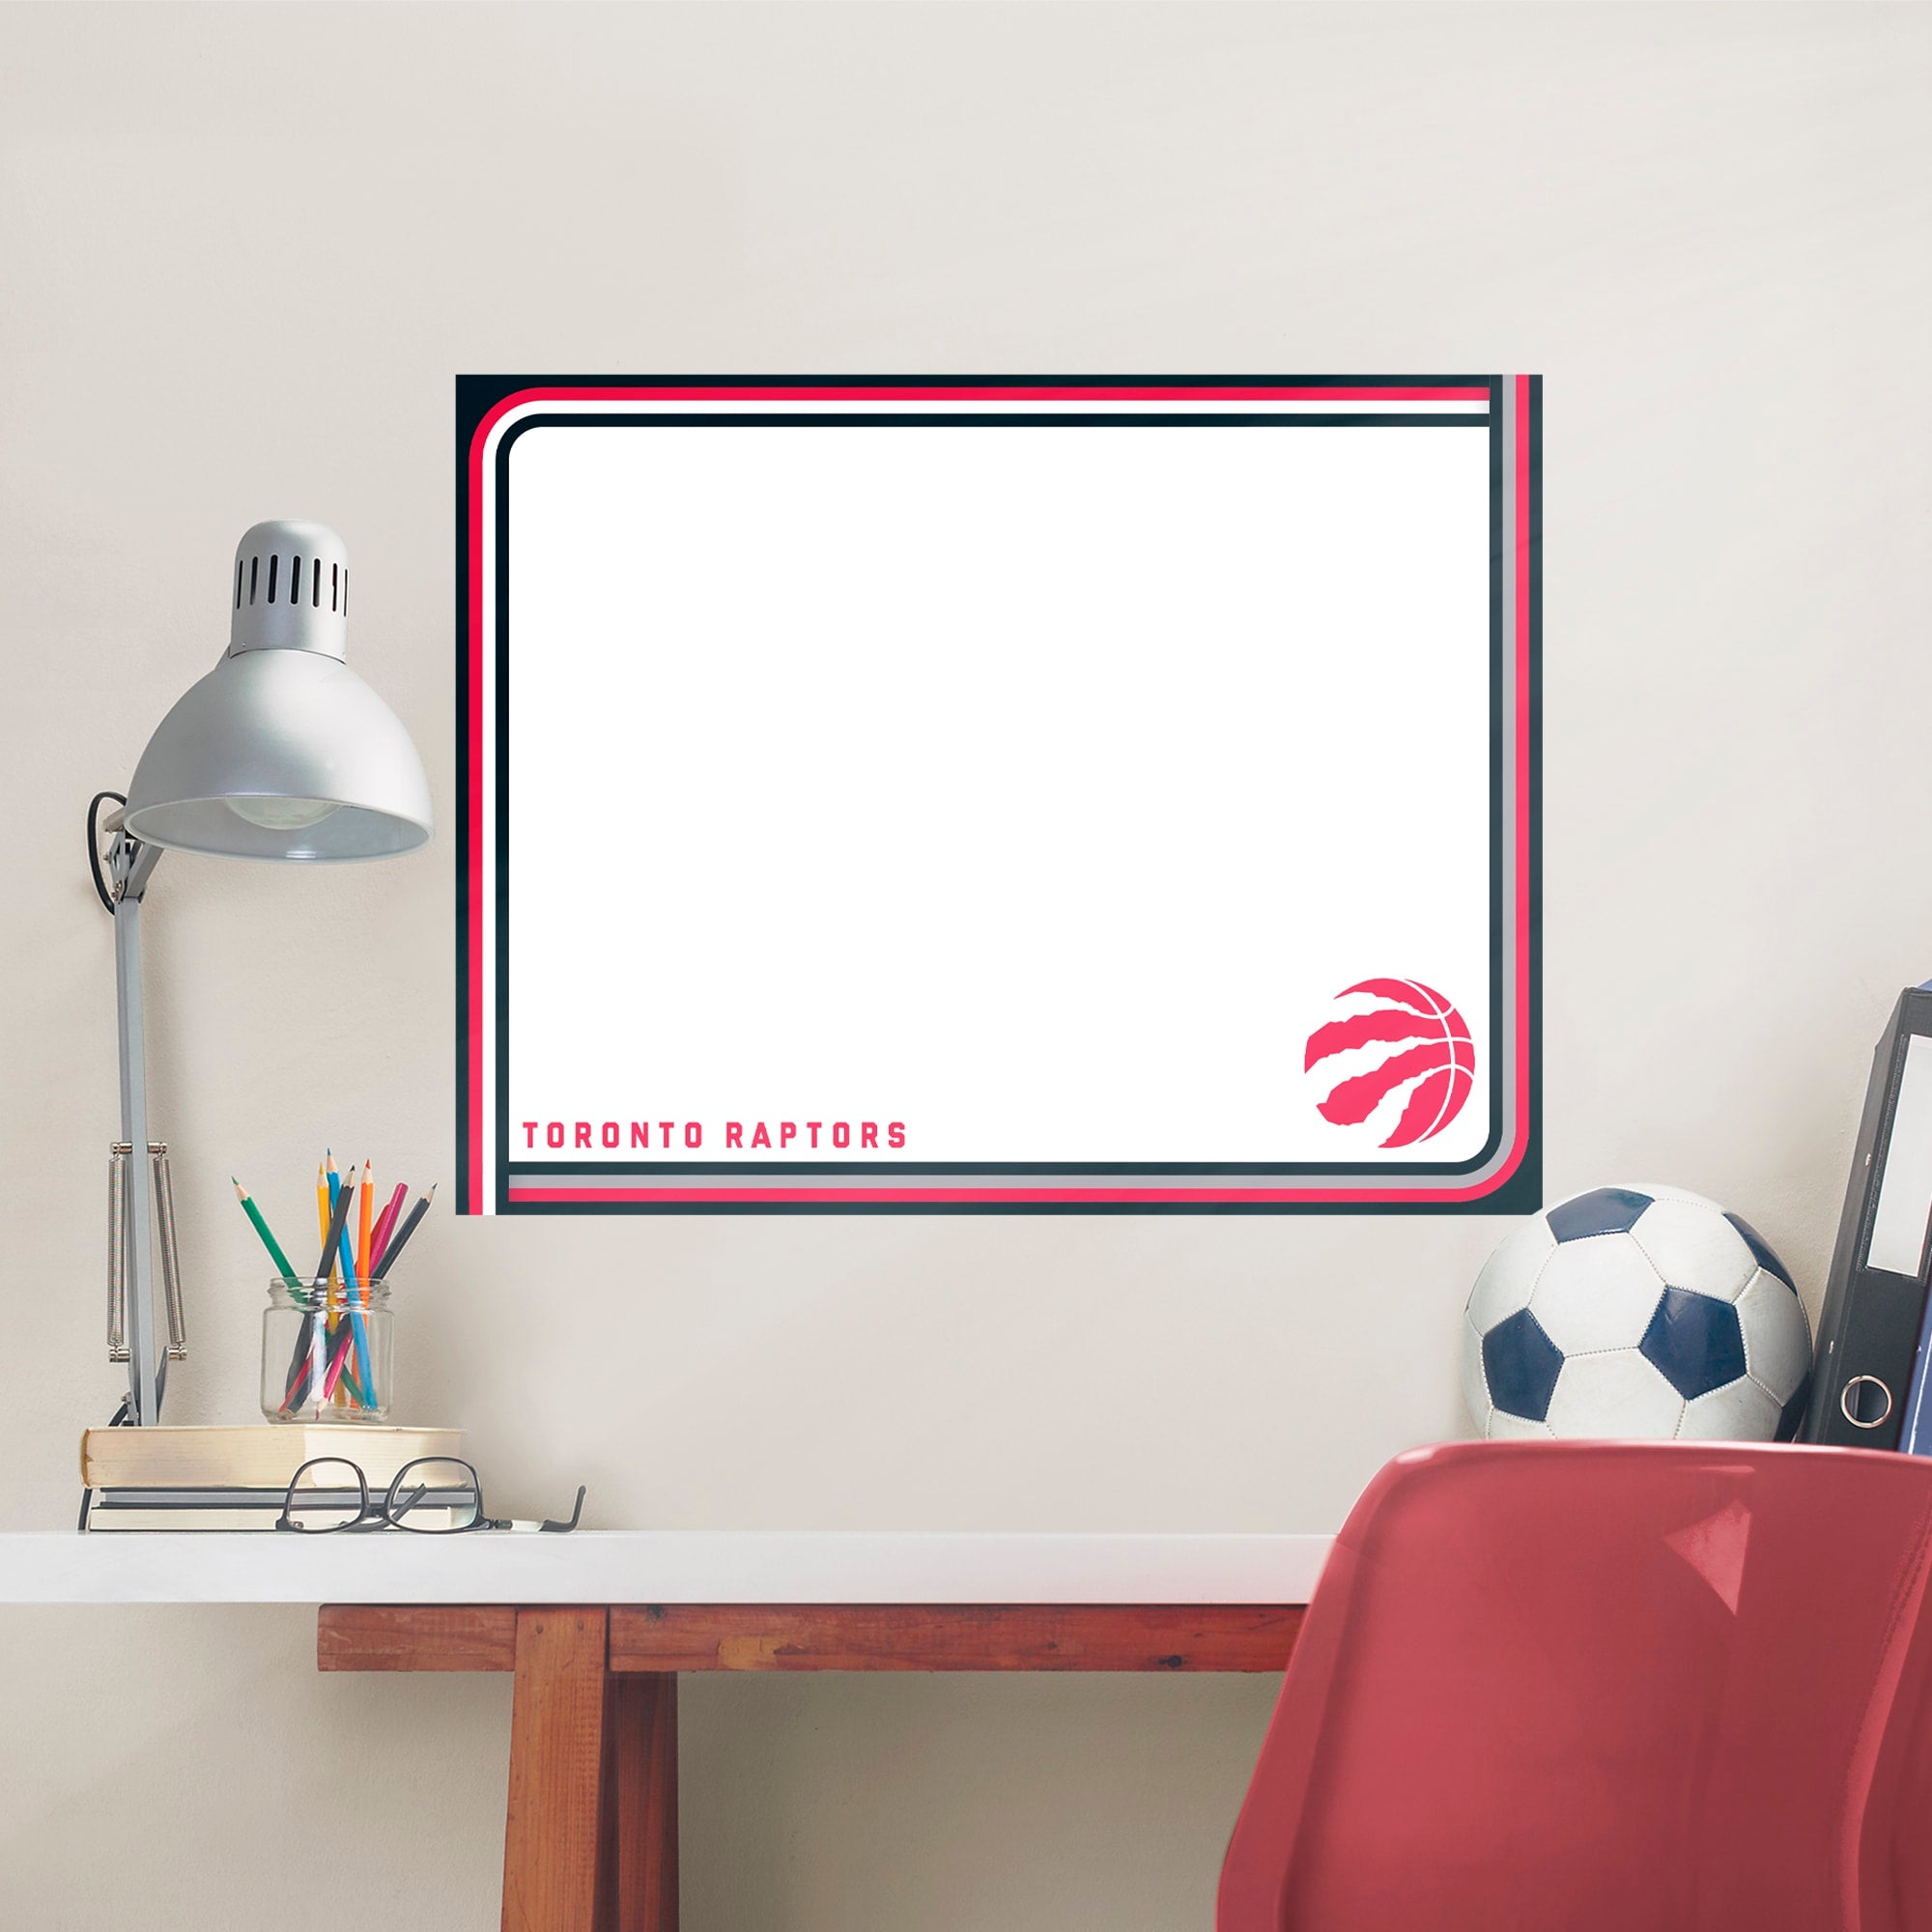 Toronto Raptors for Toronto Raptors: Dry Erase Whiteboard - Officially Licensed NBA Removable Wall Decal XL by Fathead | Vinyl